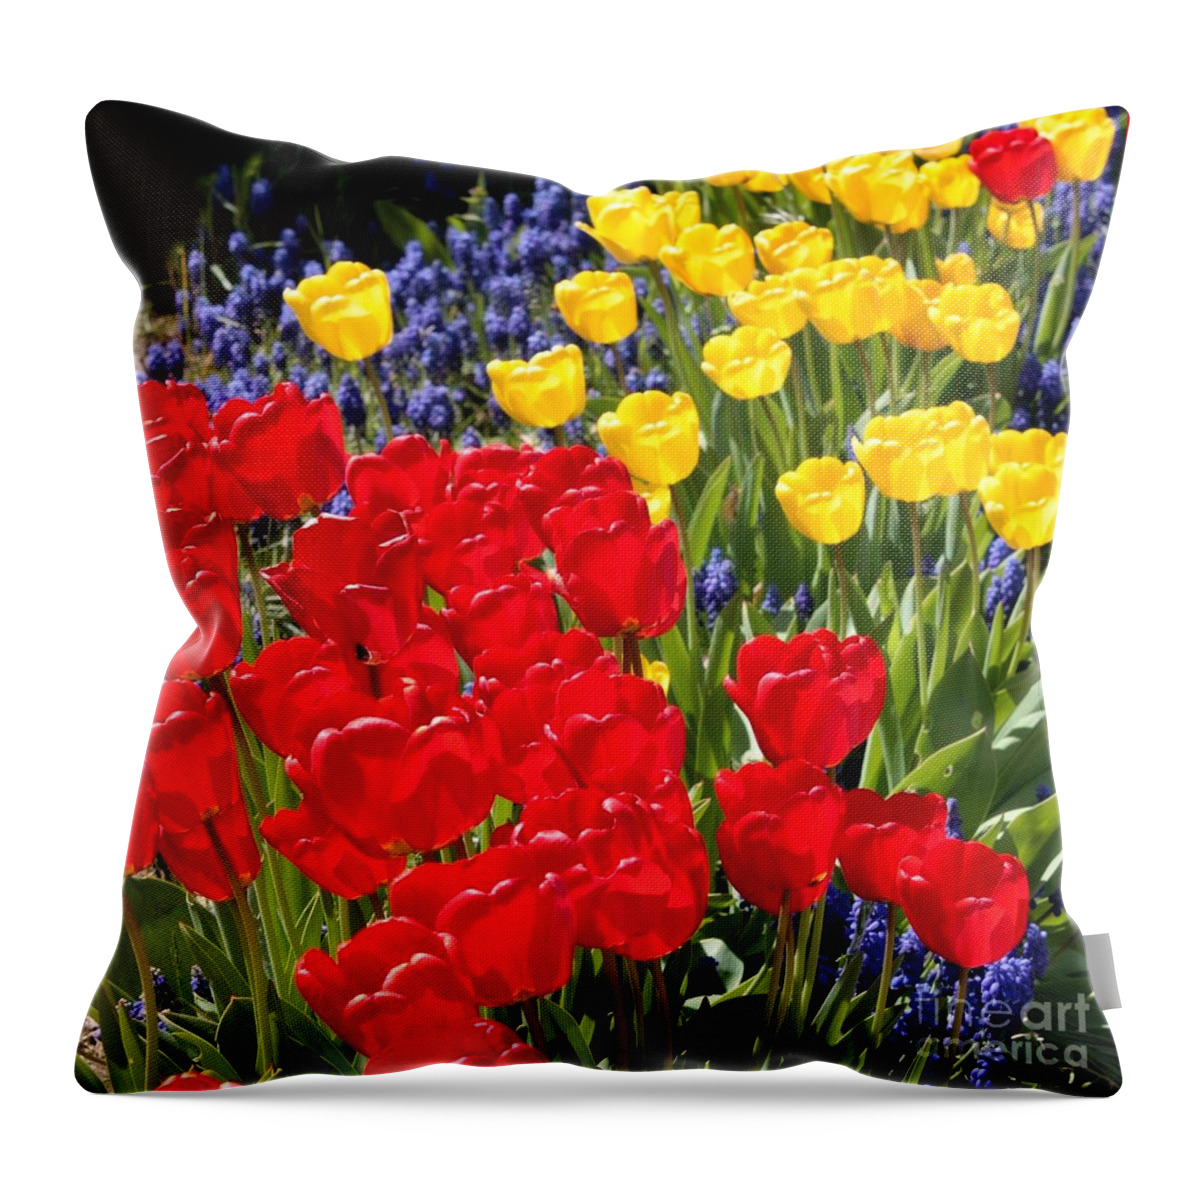 Spring Throw Pillow featuring the photograph Spring Sunshine by Carol Groenen